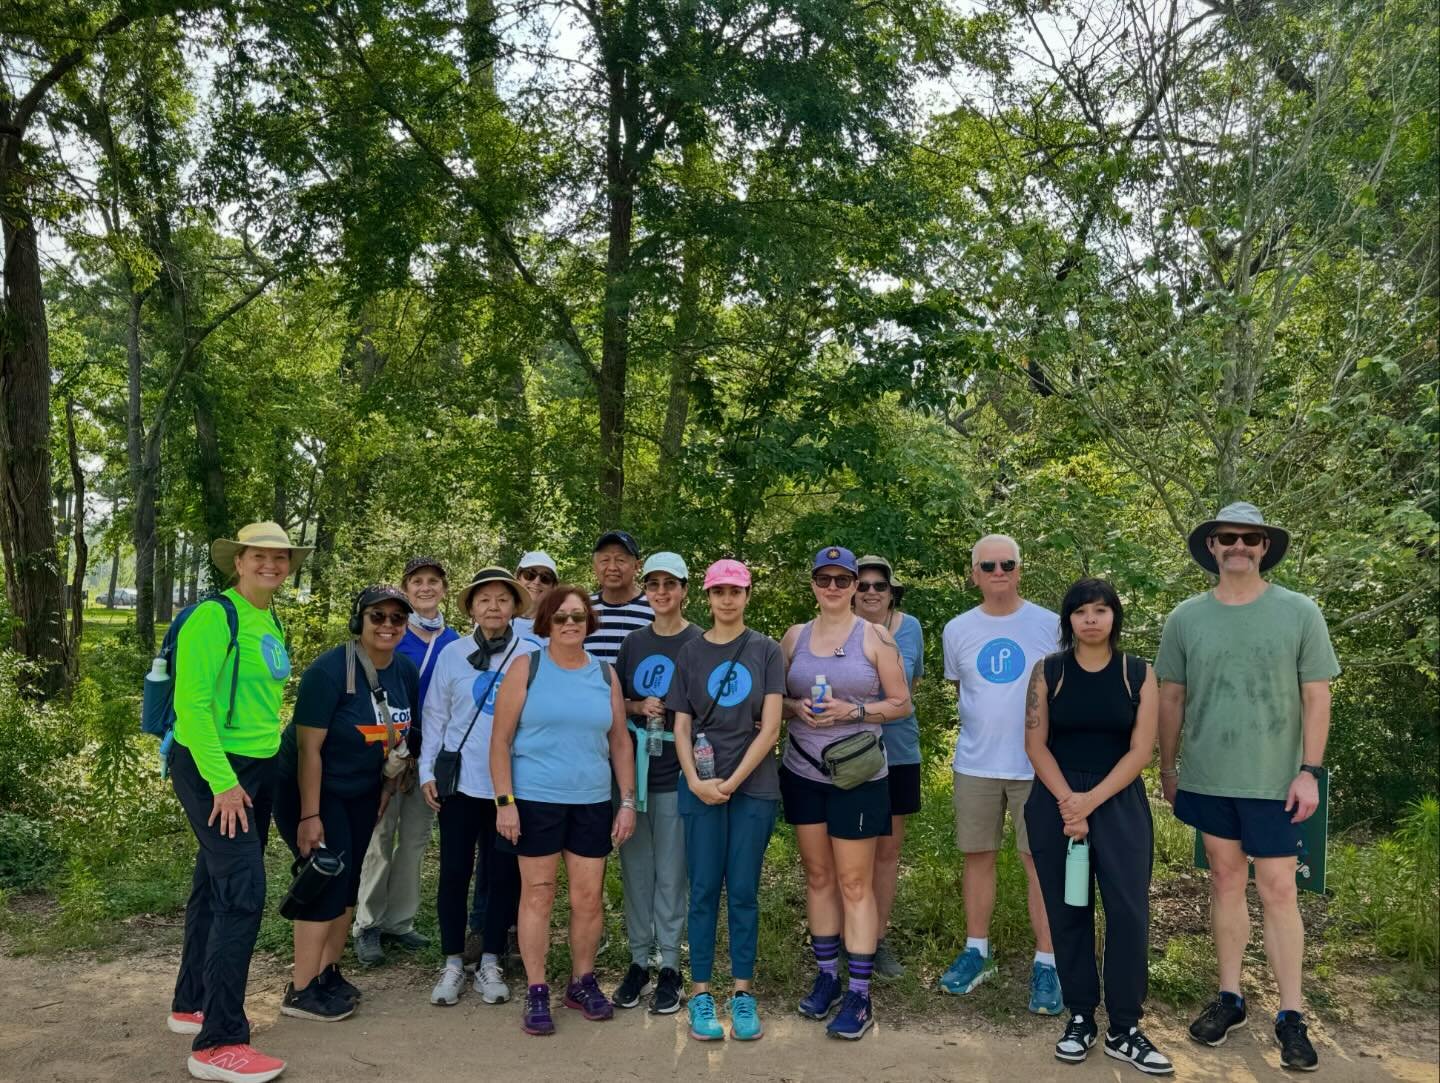 Wellness Walk Friday at Memorial Park. So much beauty along the path! Join us next week and see what a difference a walk in the woods can make. #GoWalkYourself #Houston @memorialparkconservancy